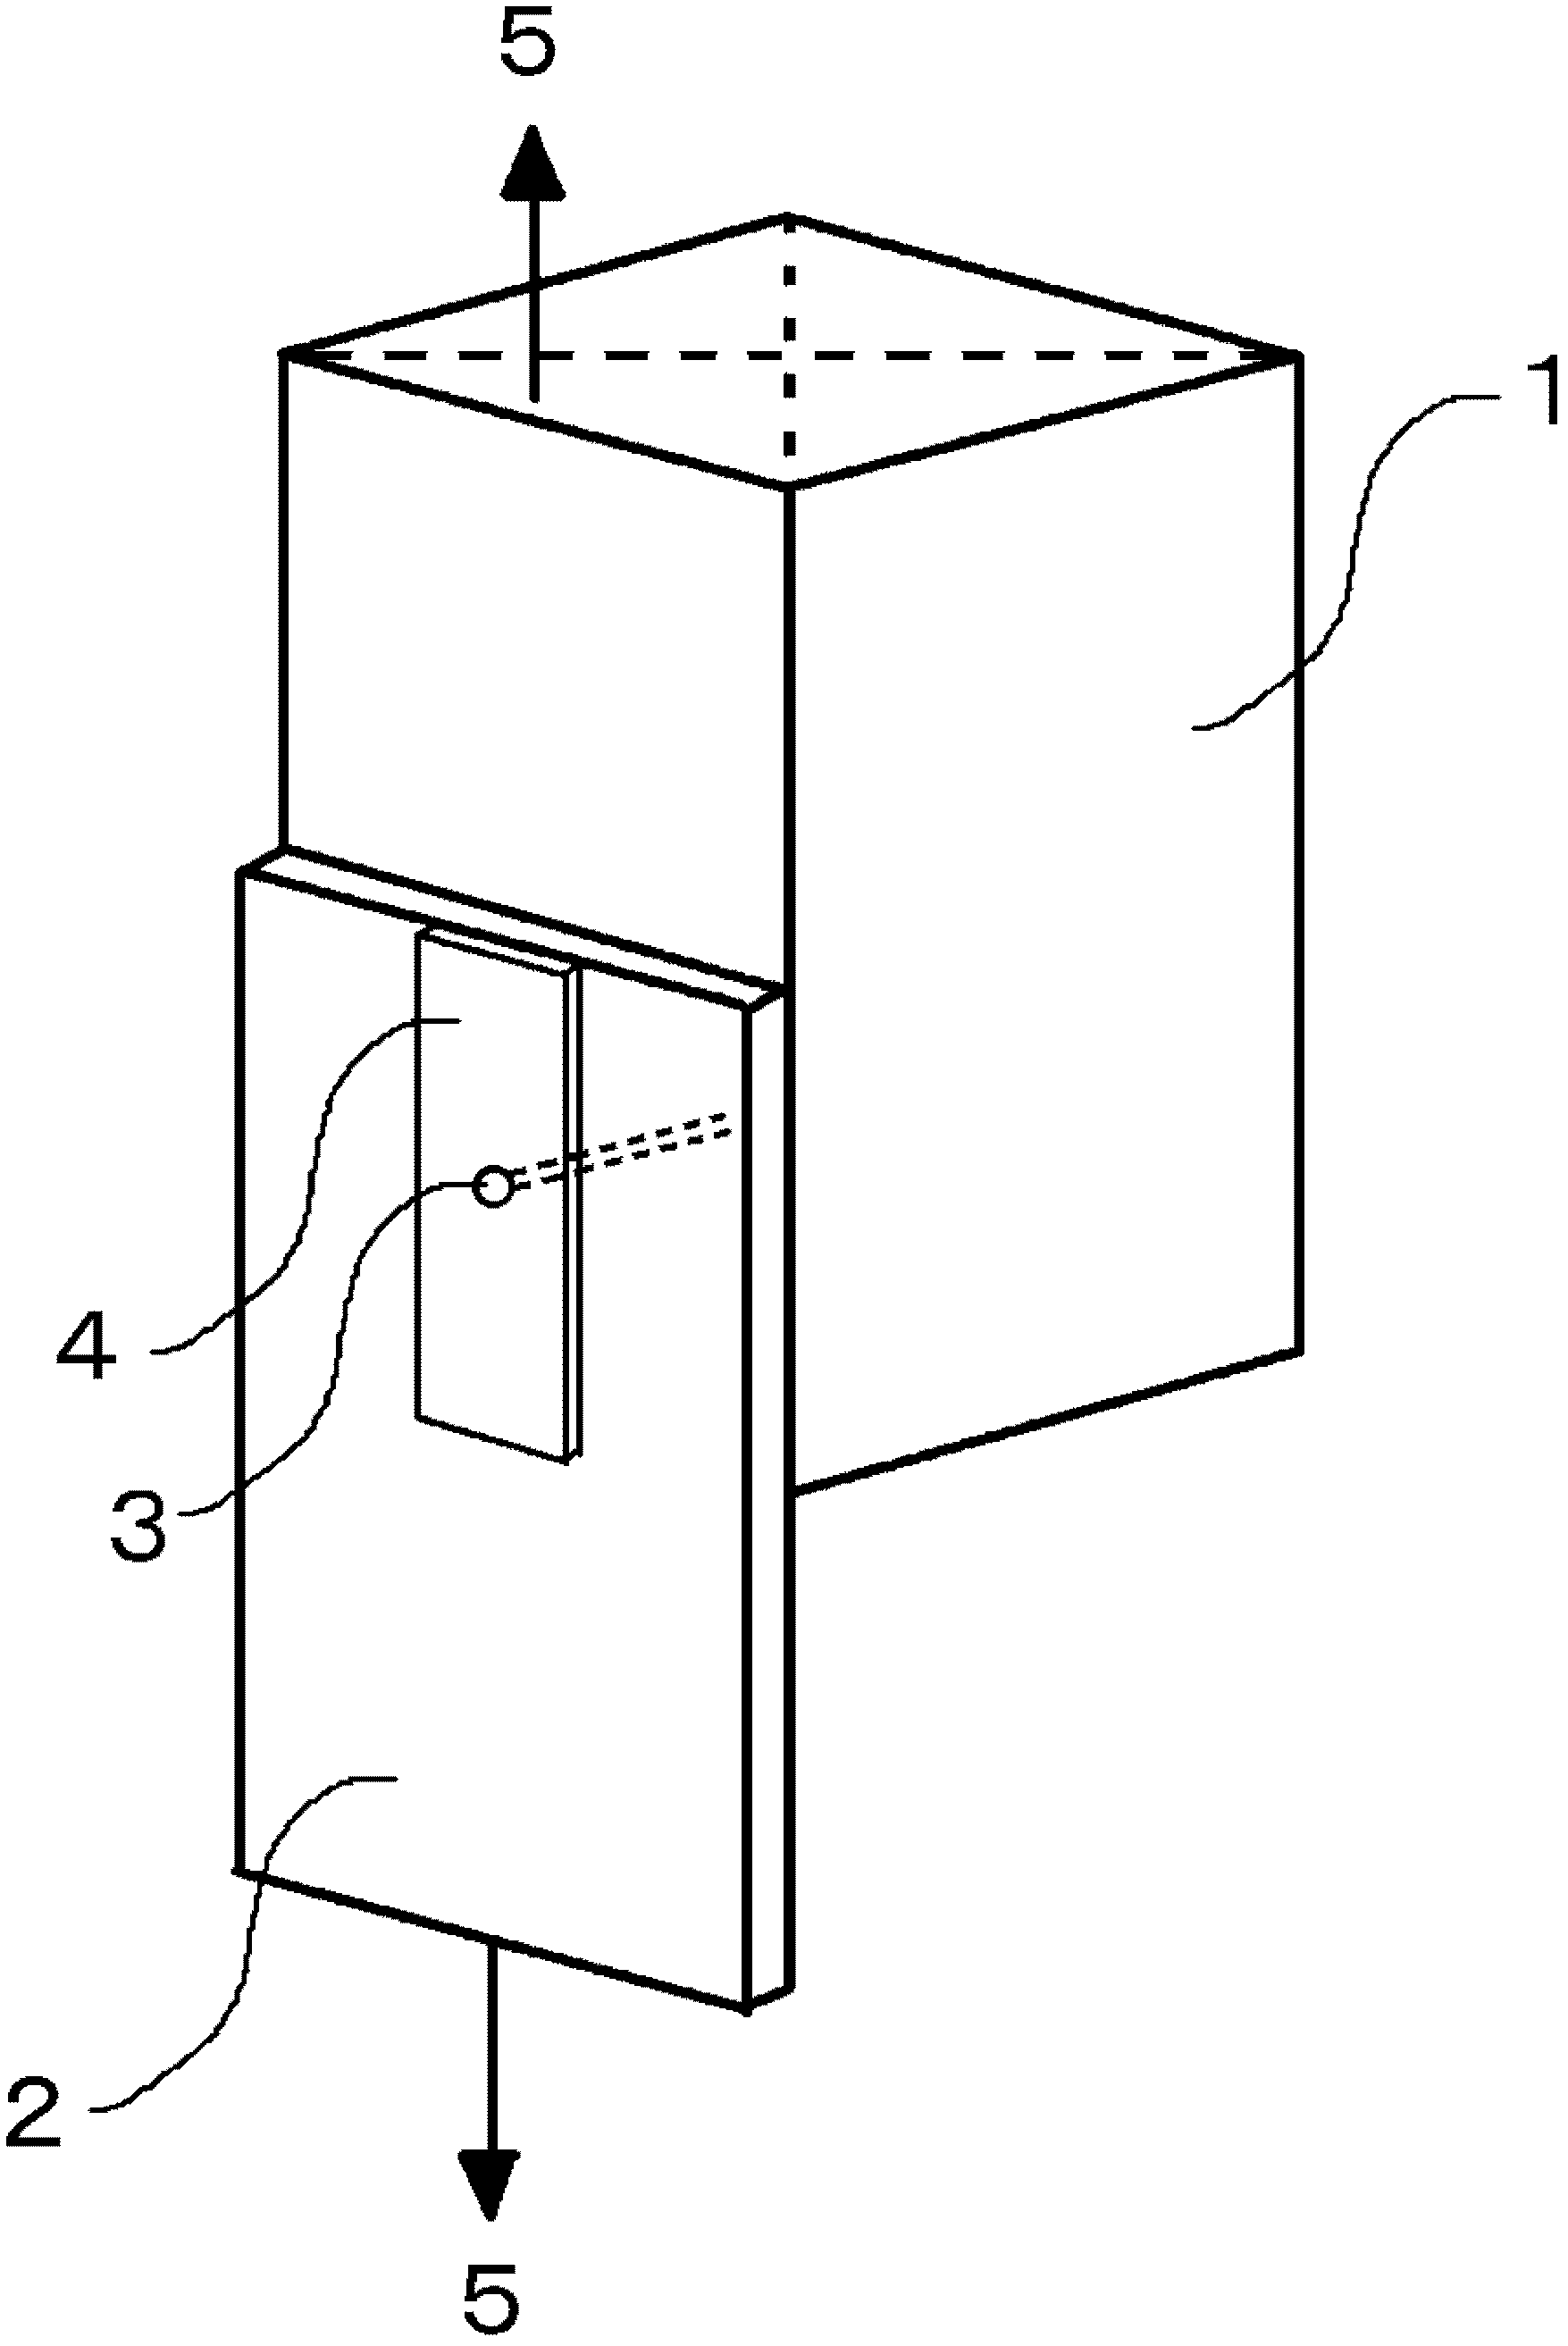 Installation structure of base of exterior wall